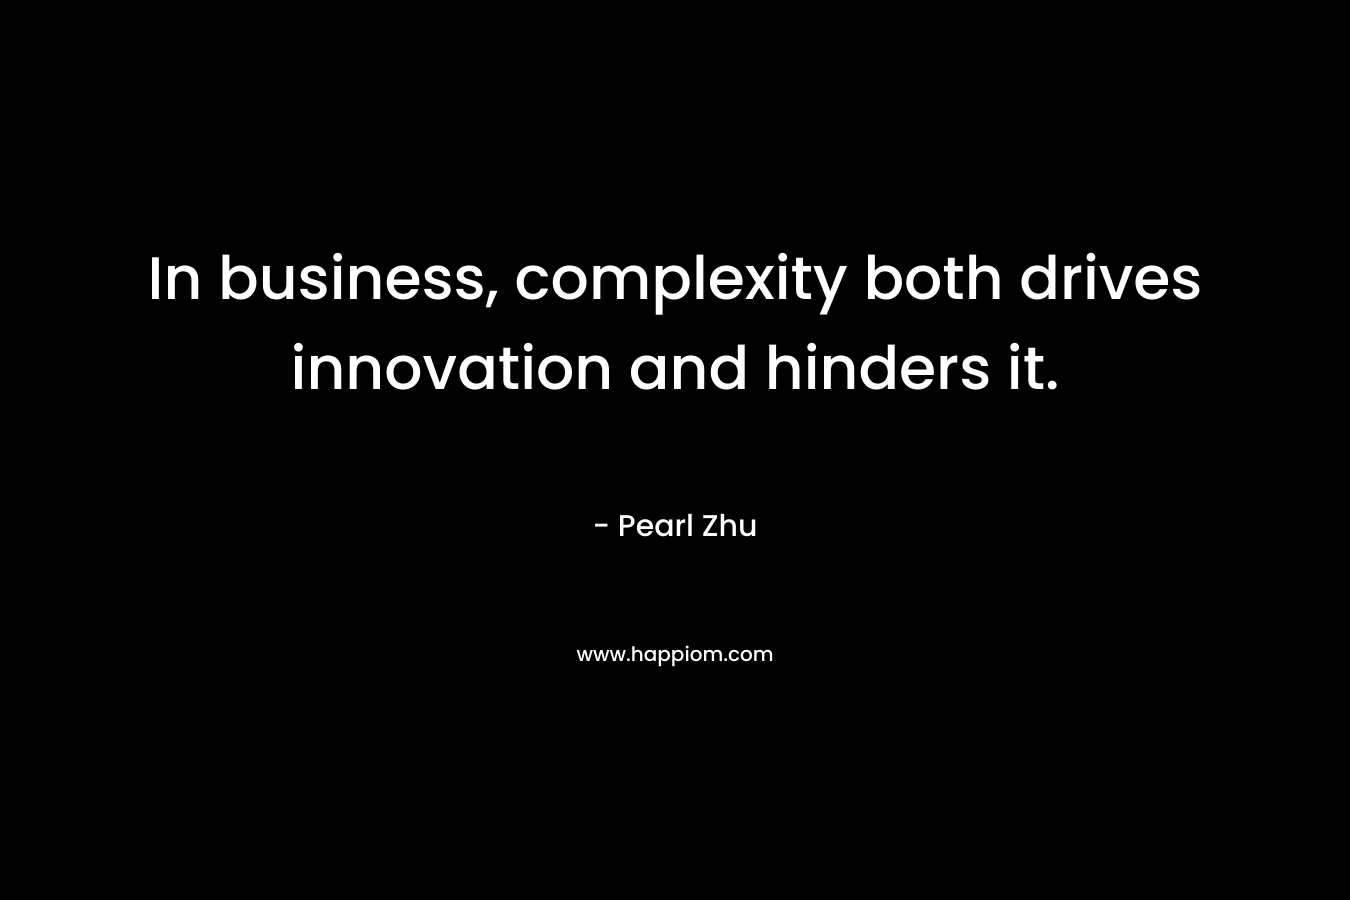 In business, complexity both drives innovation and hinders it. – Pearl Zhu